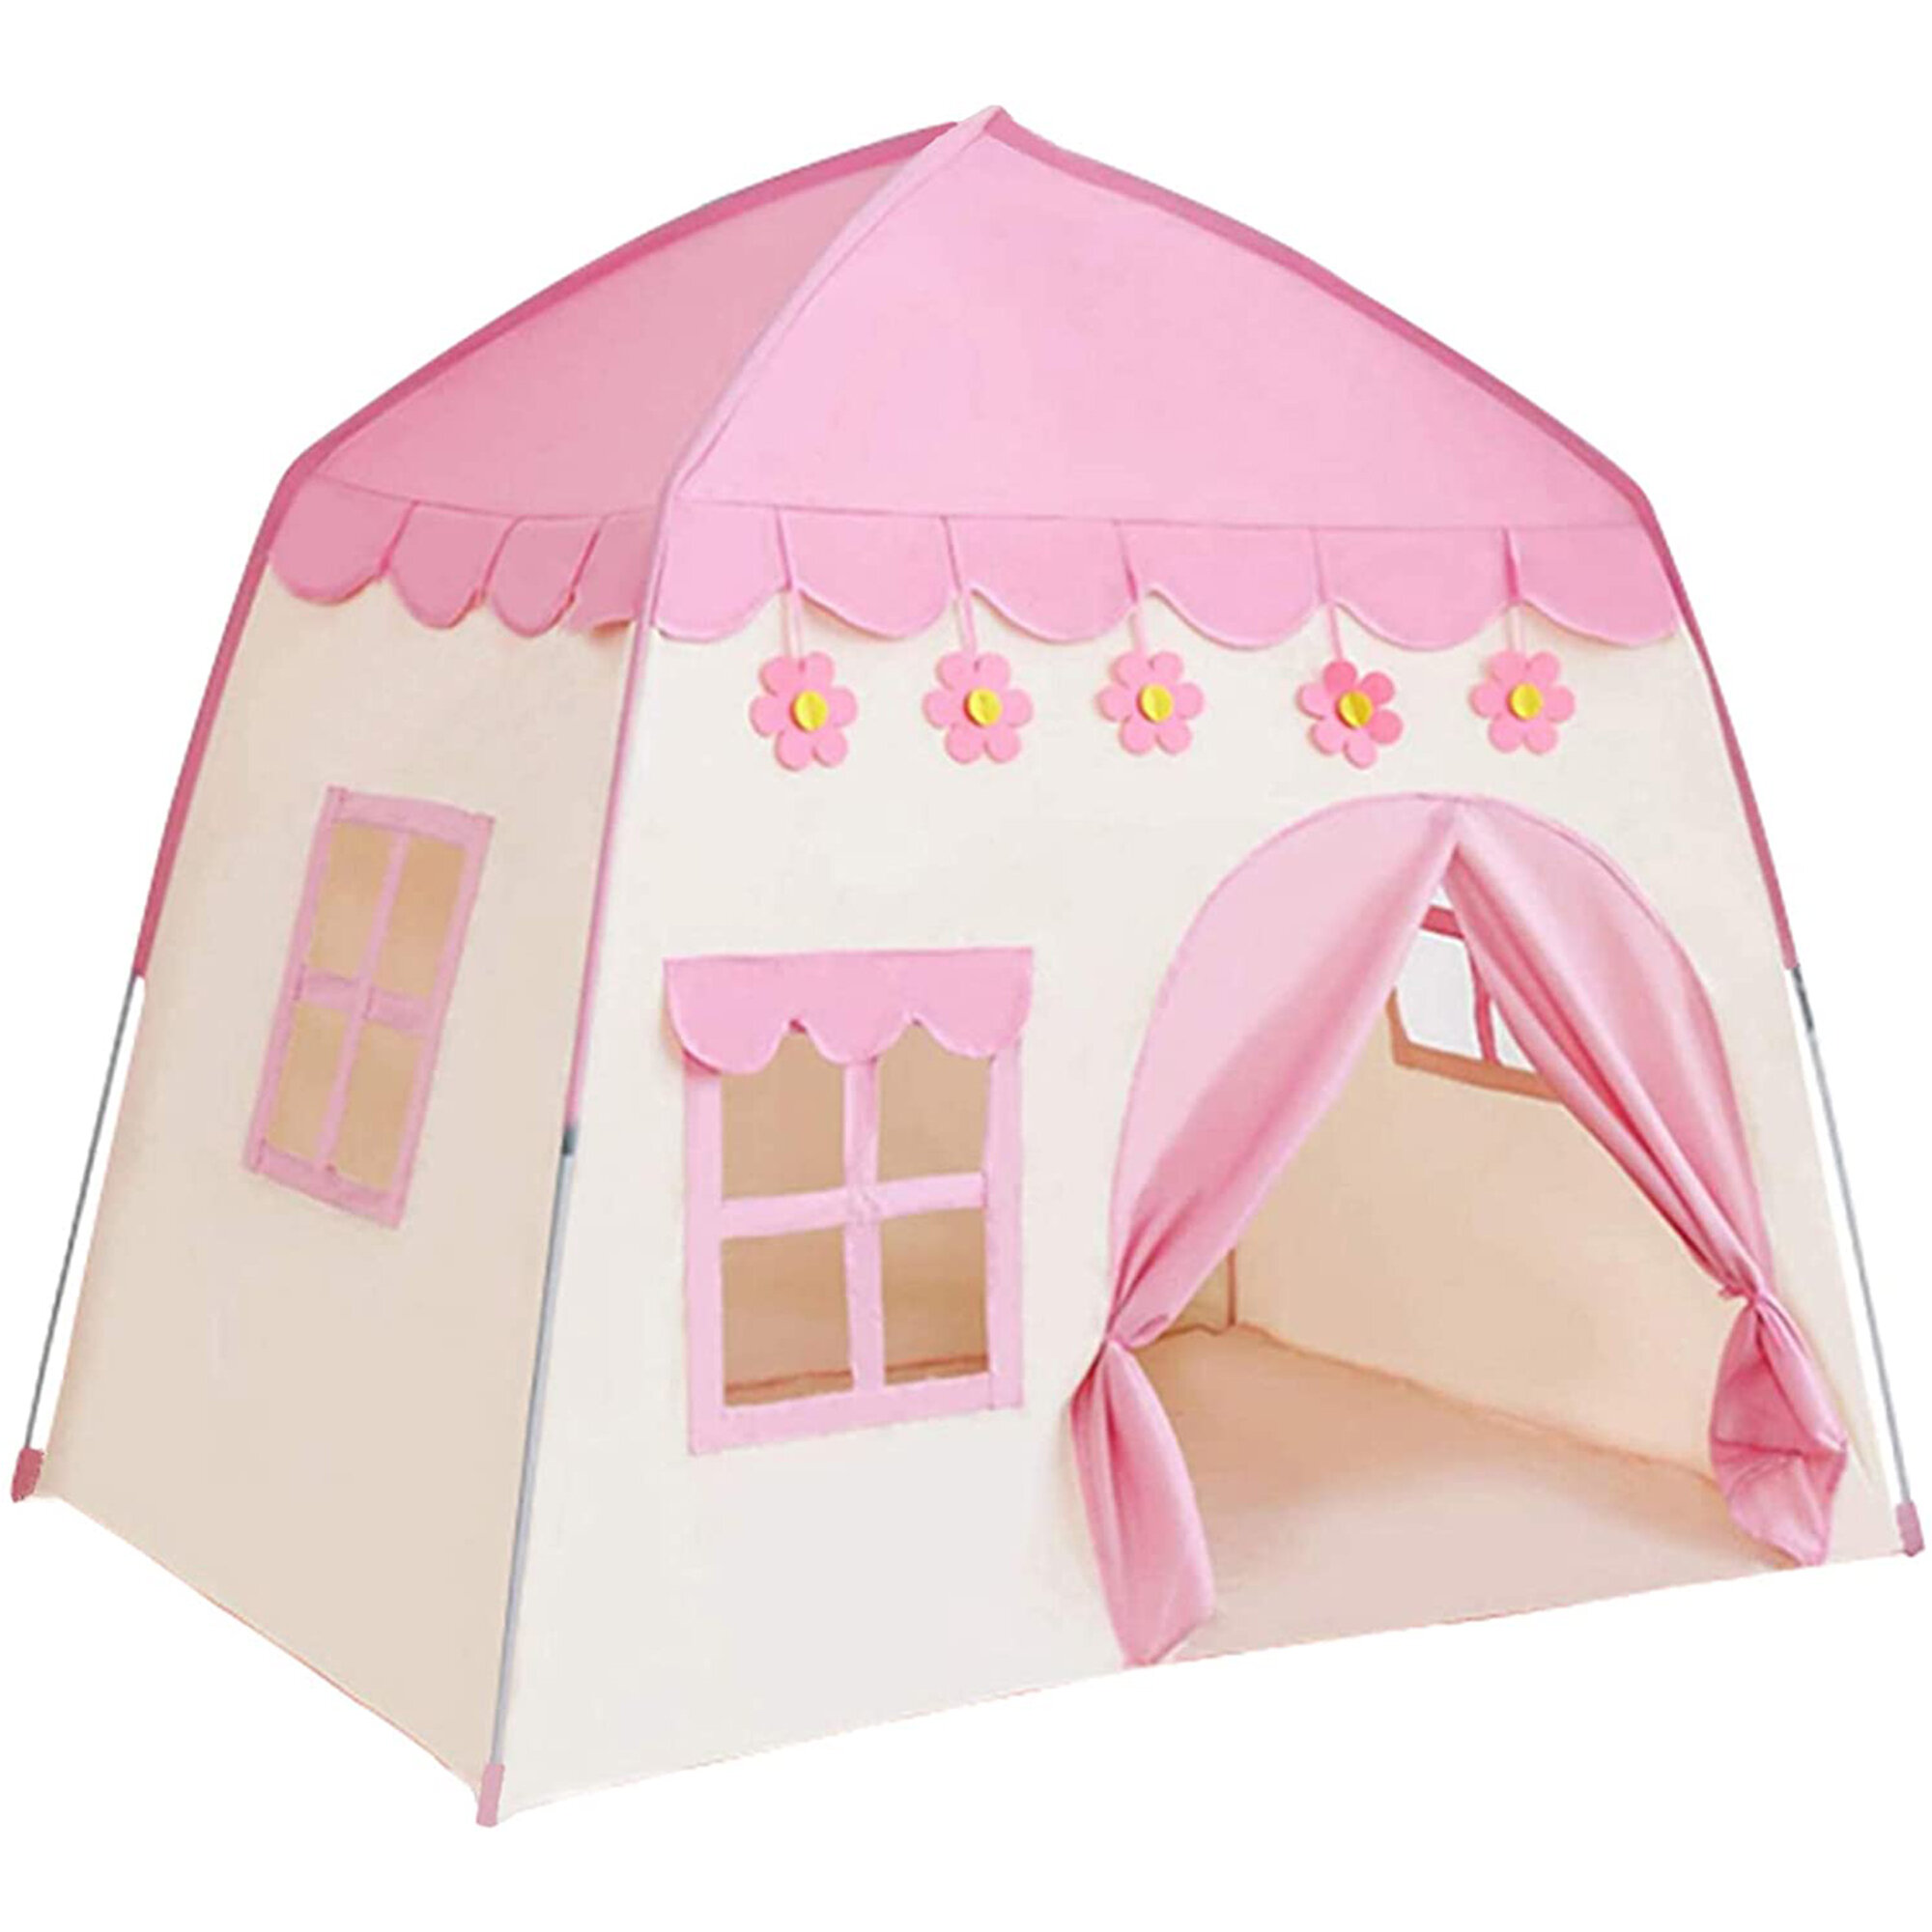 Foldable Indoor Outdoor Large Playhouse Christmas Birthday Gift for Boy Girl Kids Play Tent,Kids Tent Blue Prince & Princess Castle Play Tent 